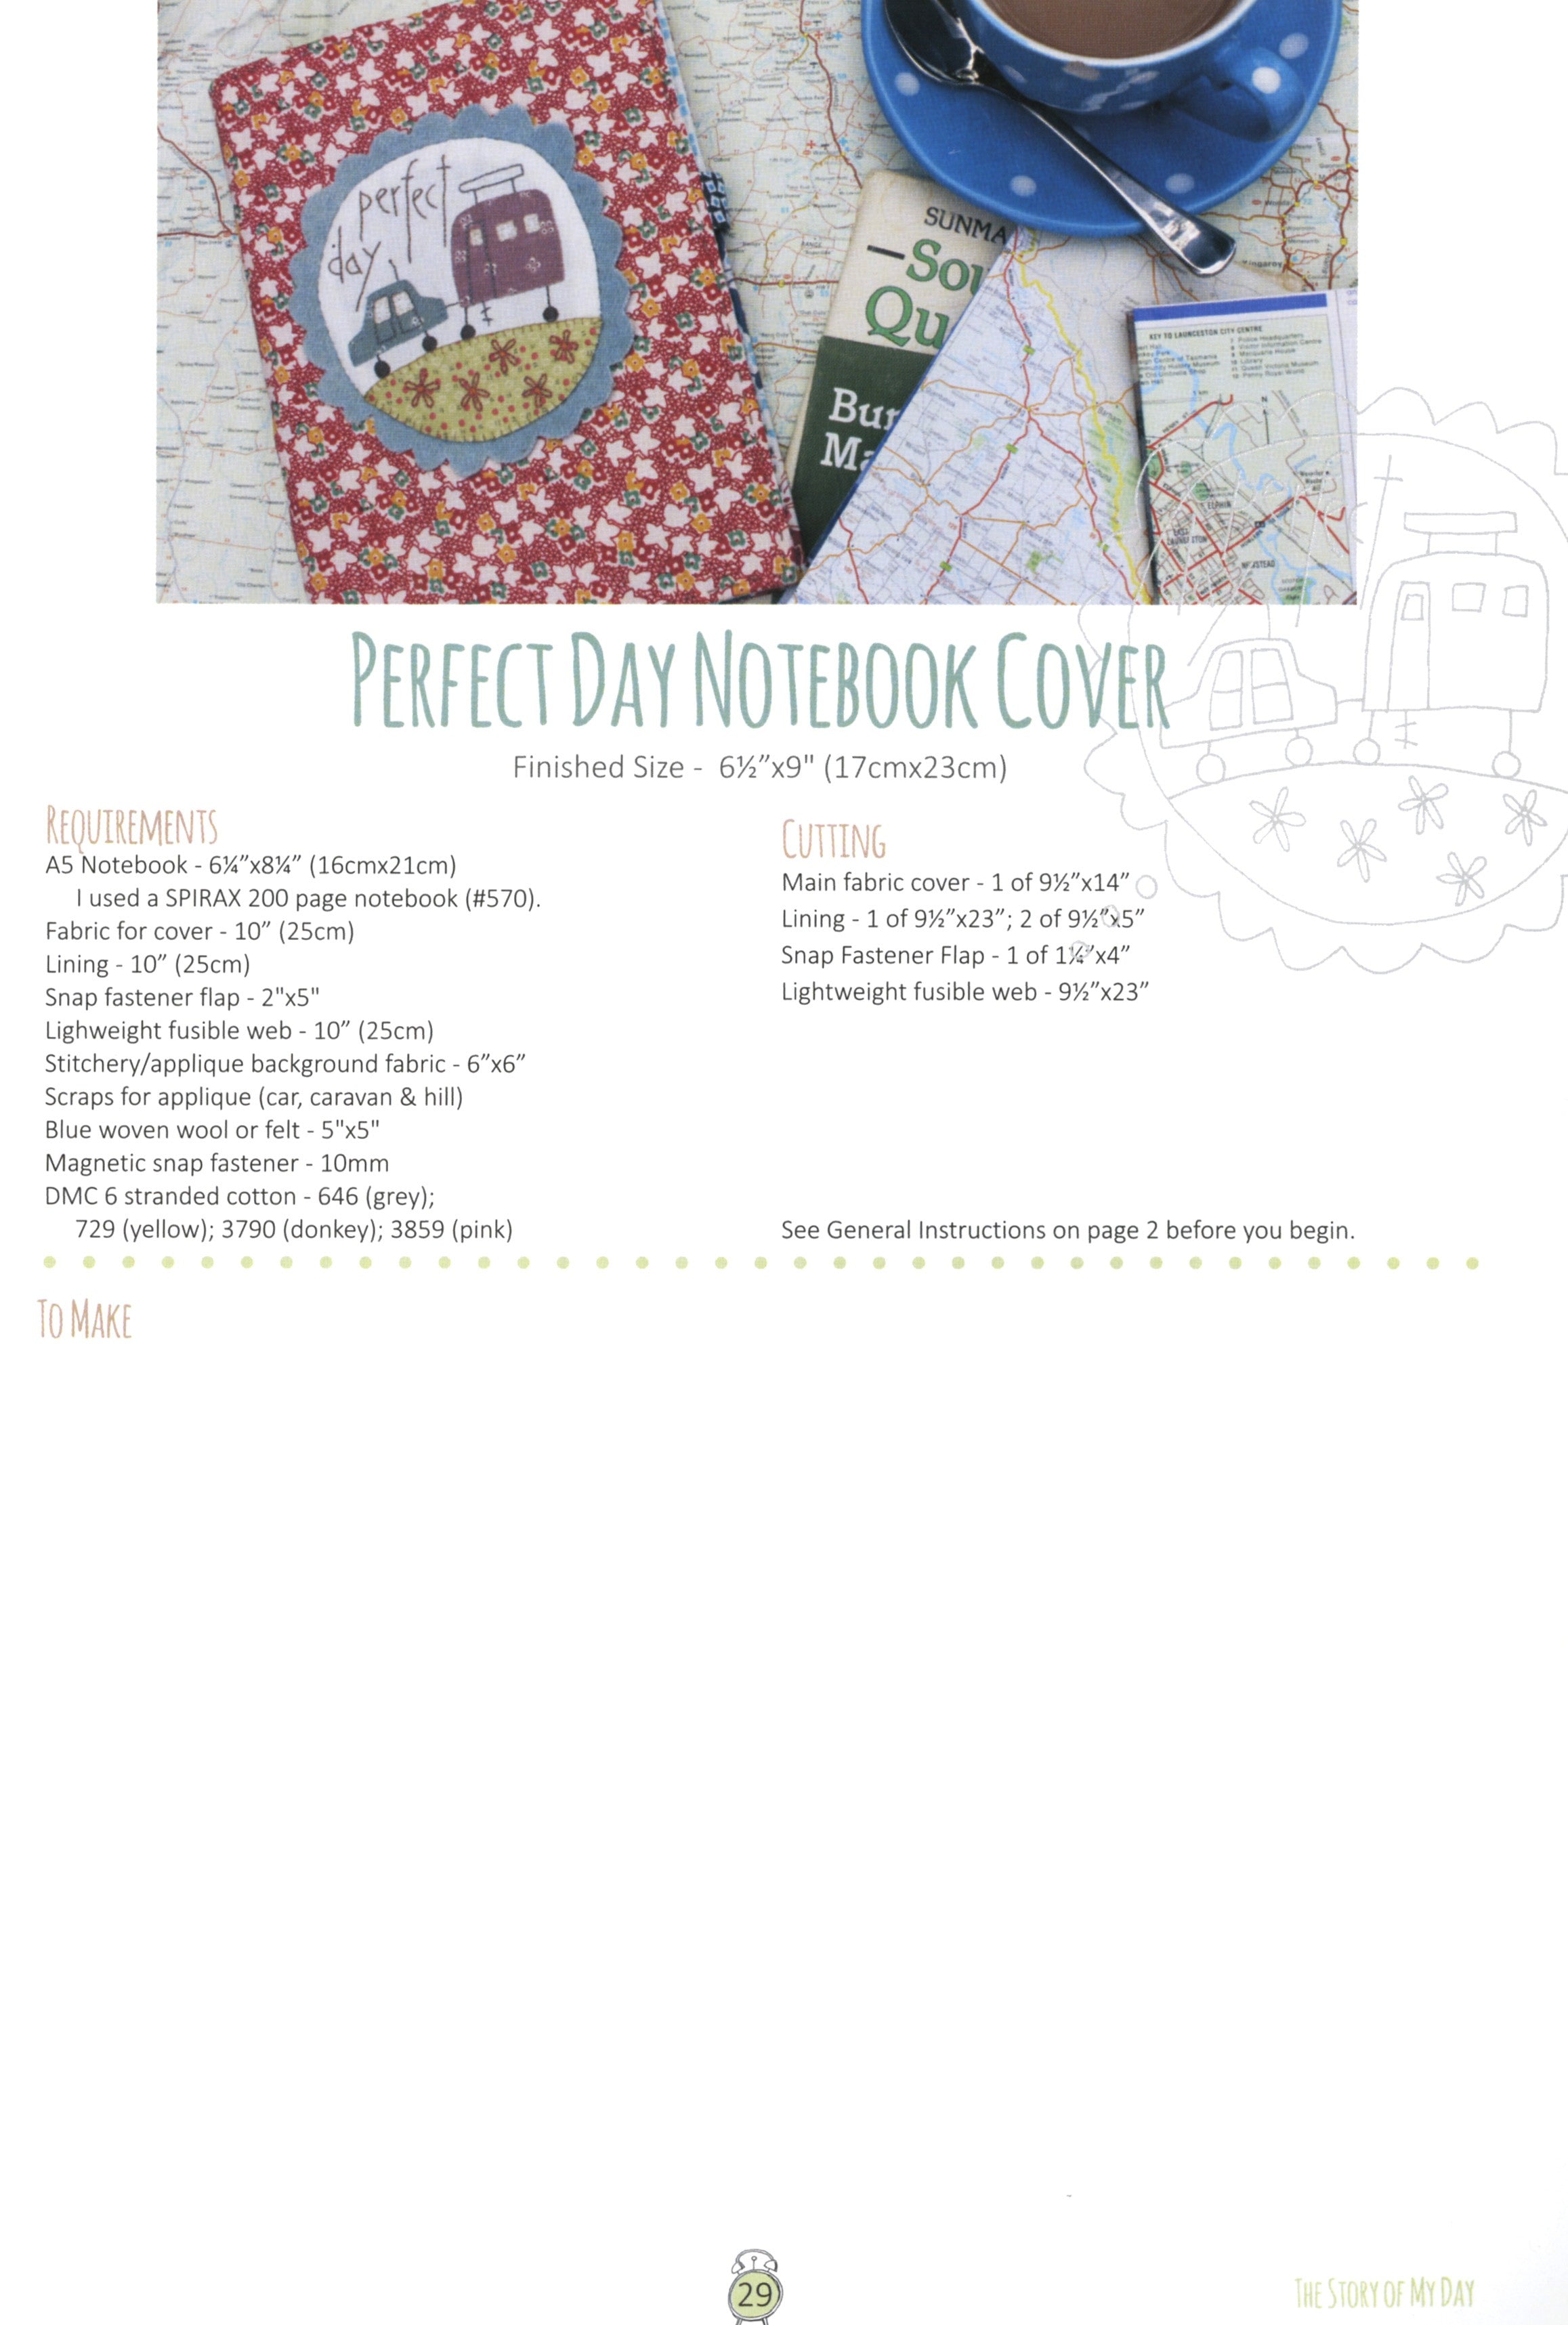 The Story of My Day Quilt Pattern Book by Anni Downs of Hatched and Patched